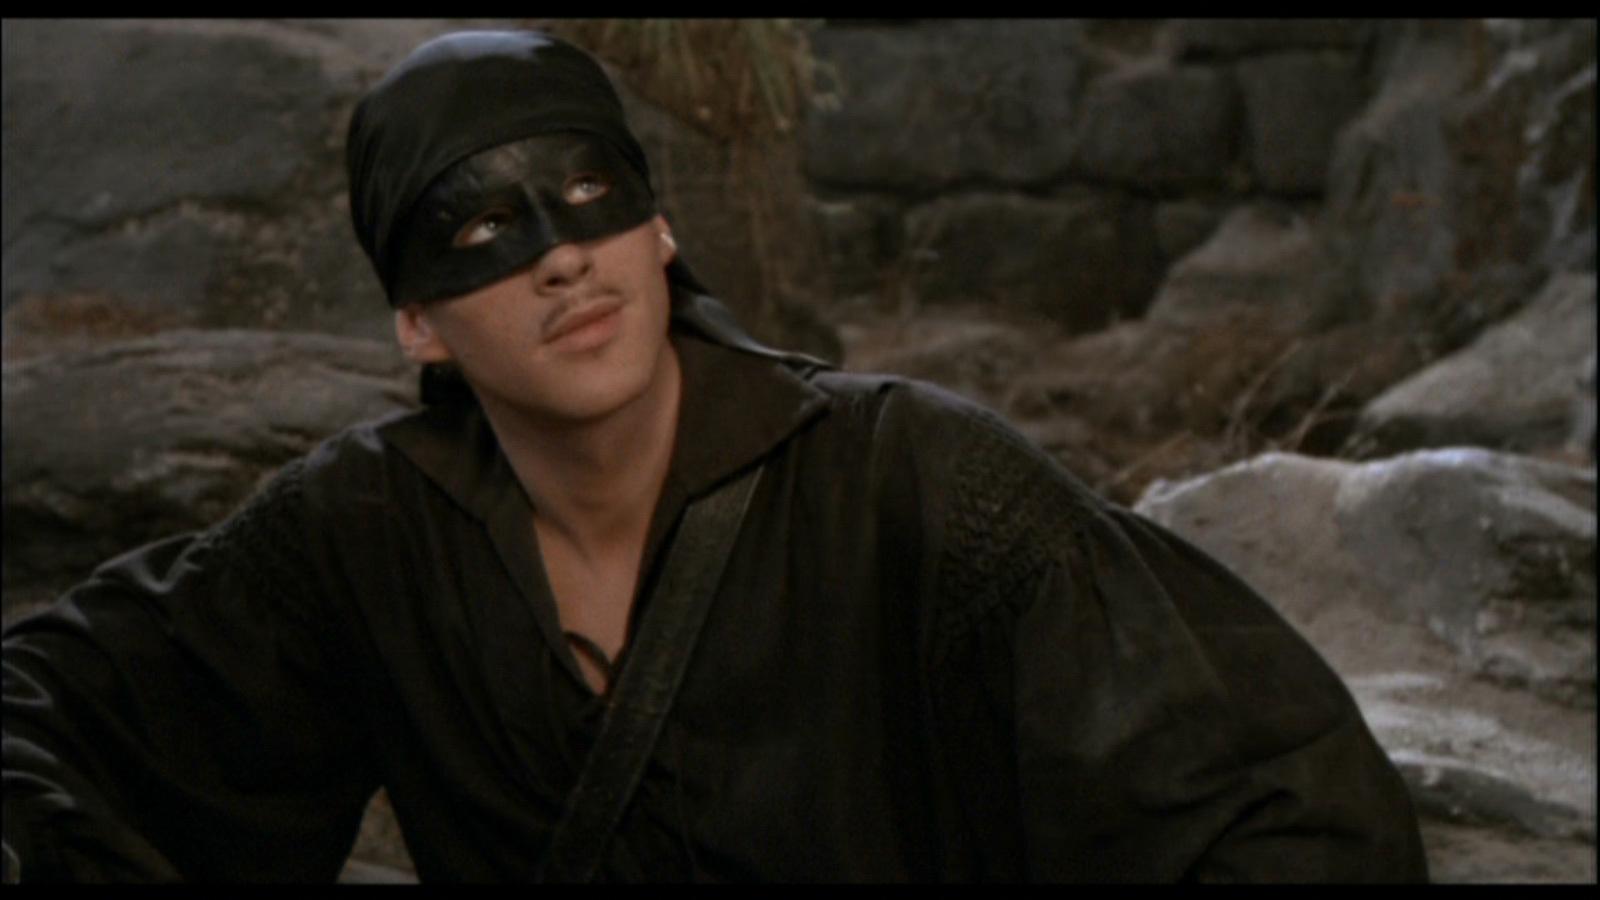 Lessons In Business Success From The Princess Bride